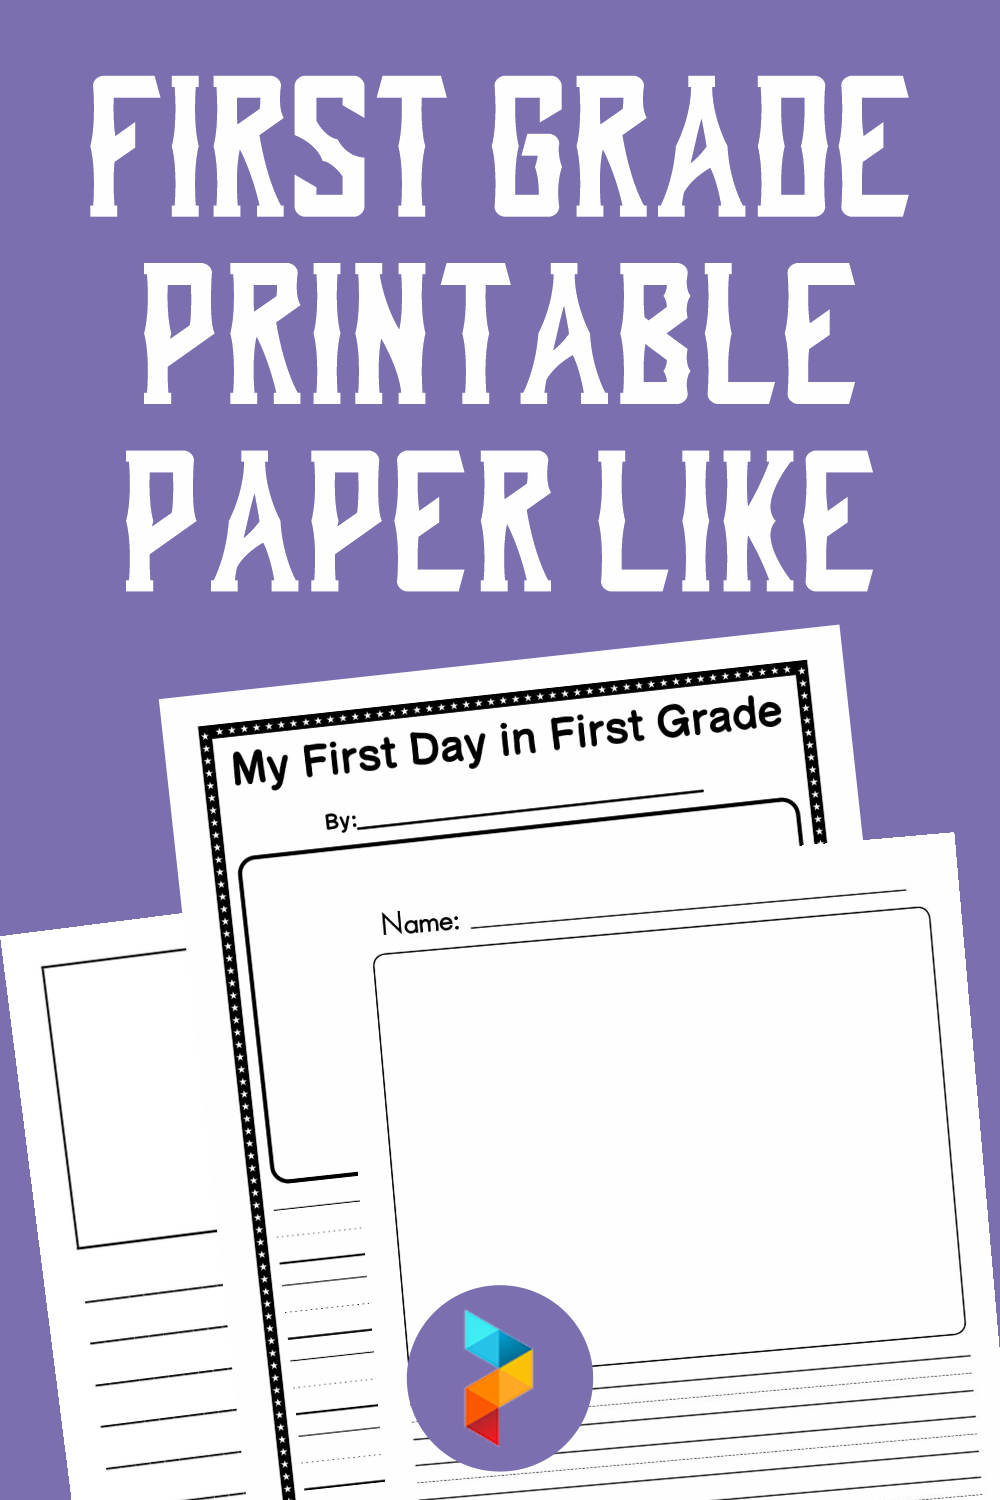 First Grade Printable Paper Like